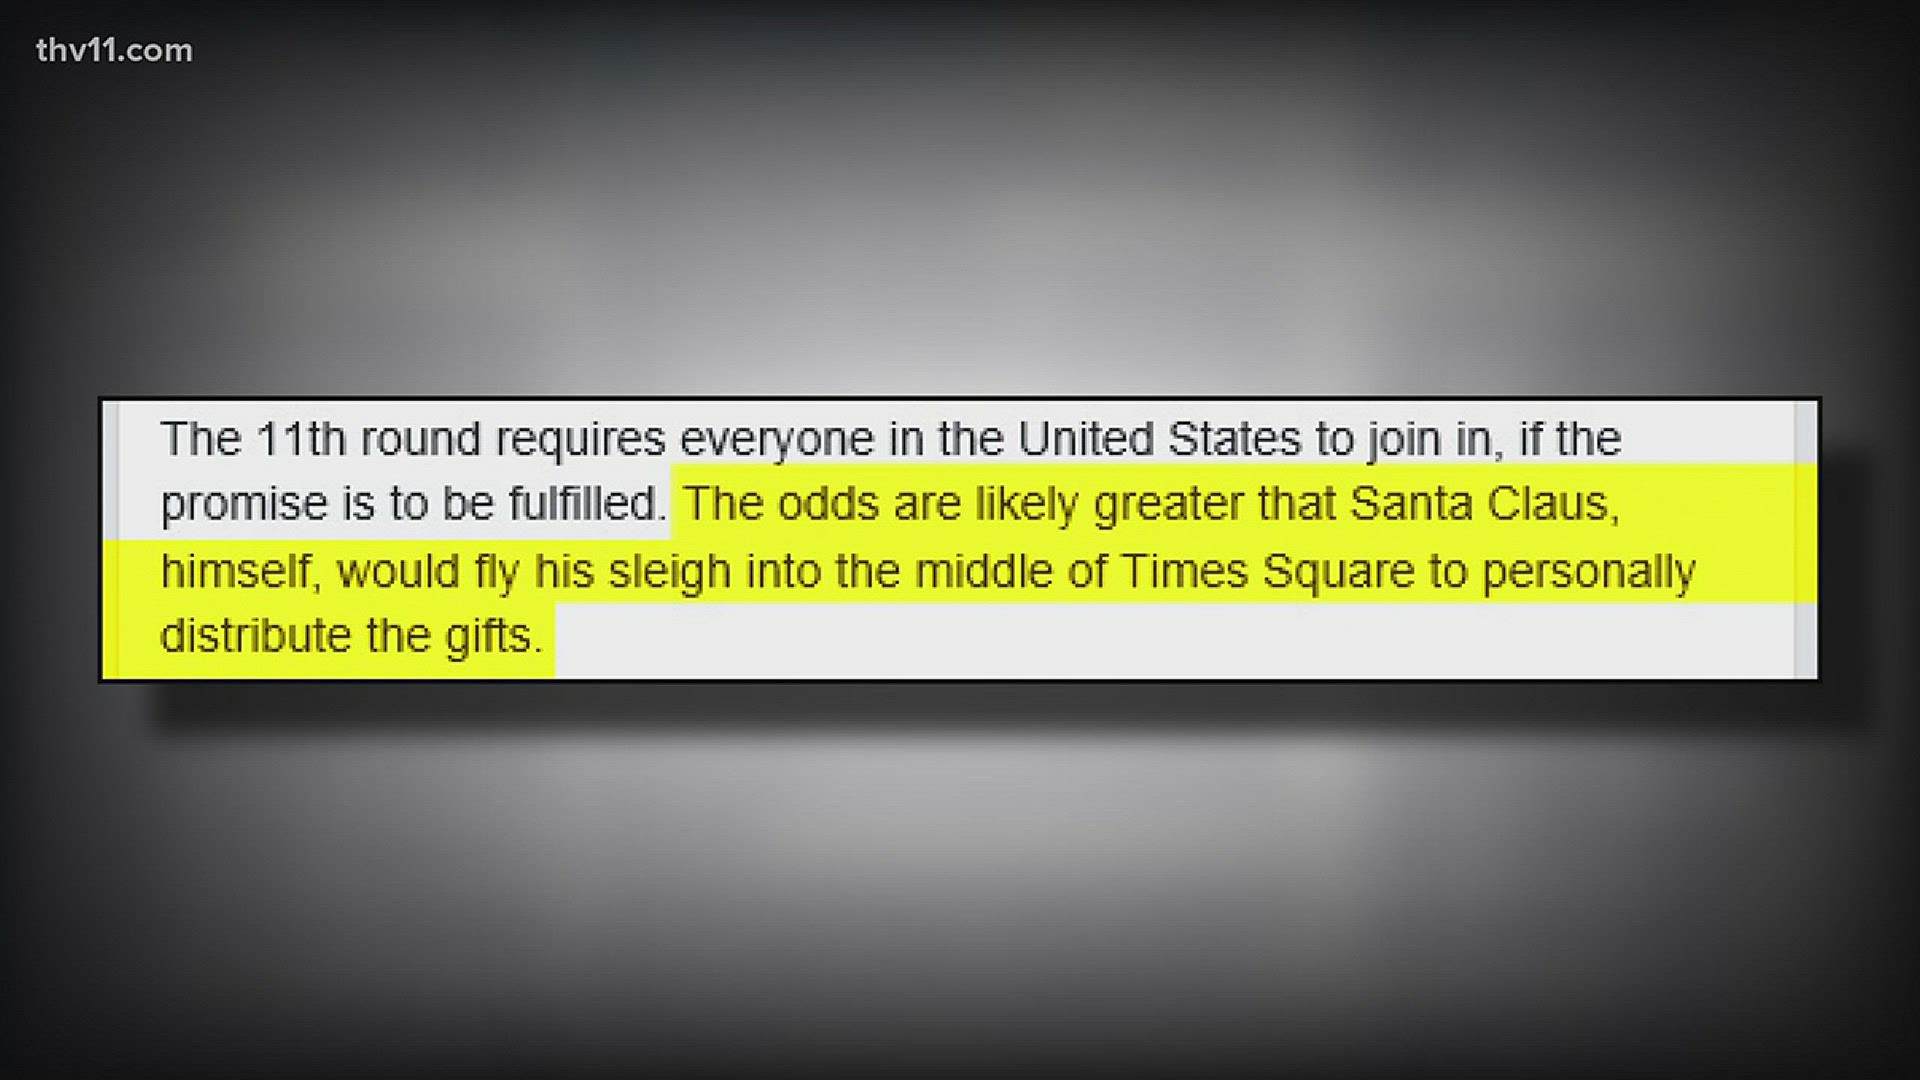 That secret Santa sister gift exchange making its rounds on social media gets the Verify treatment..